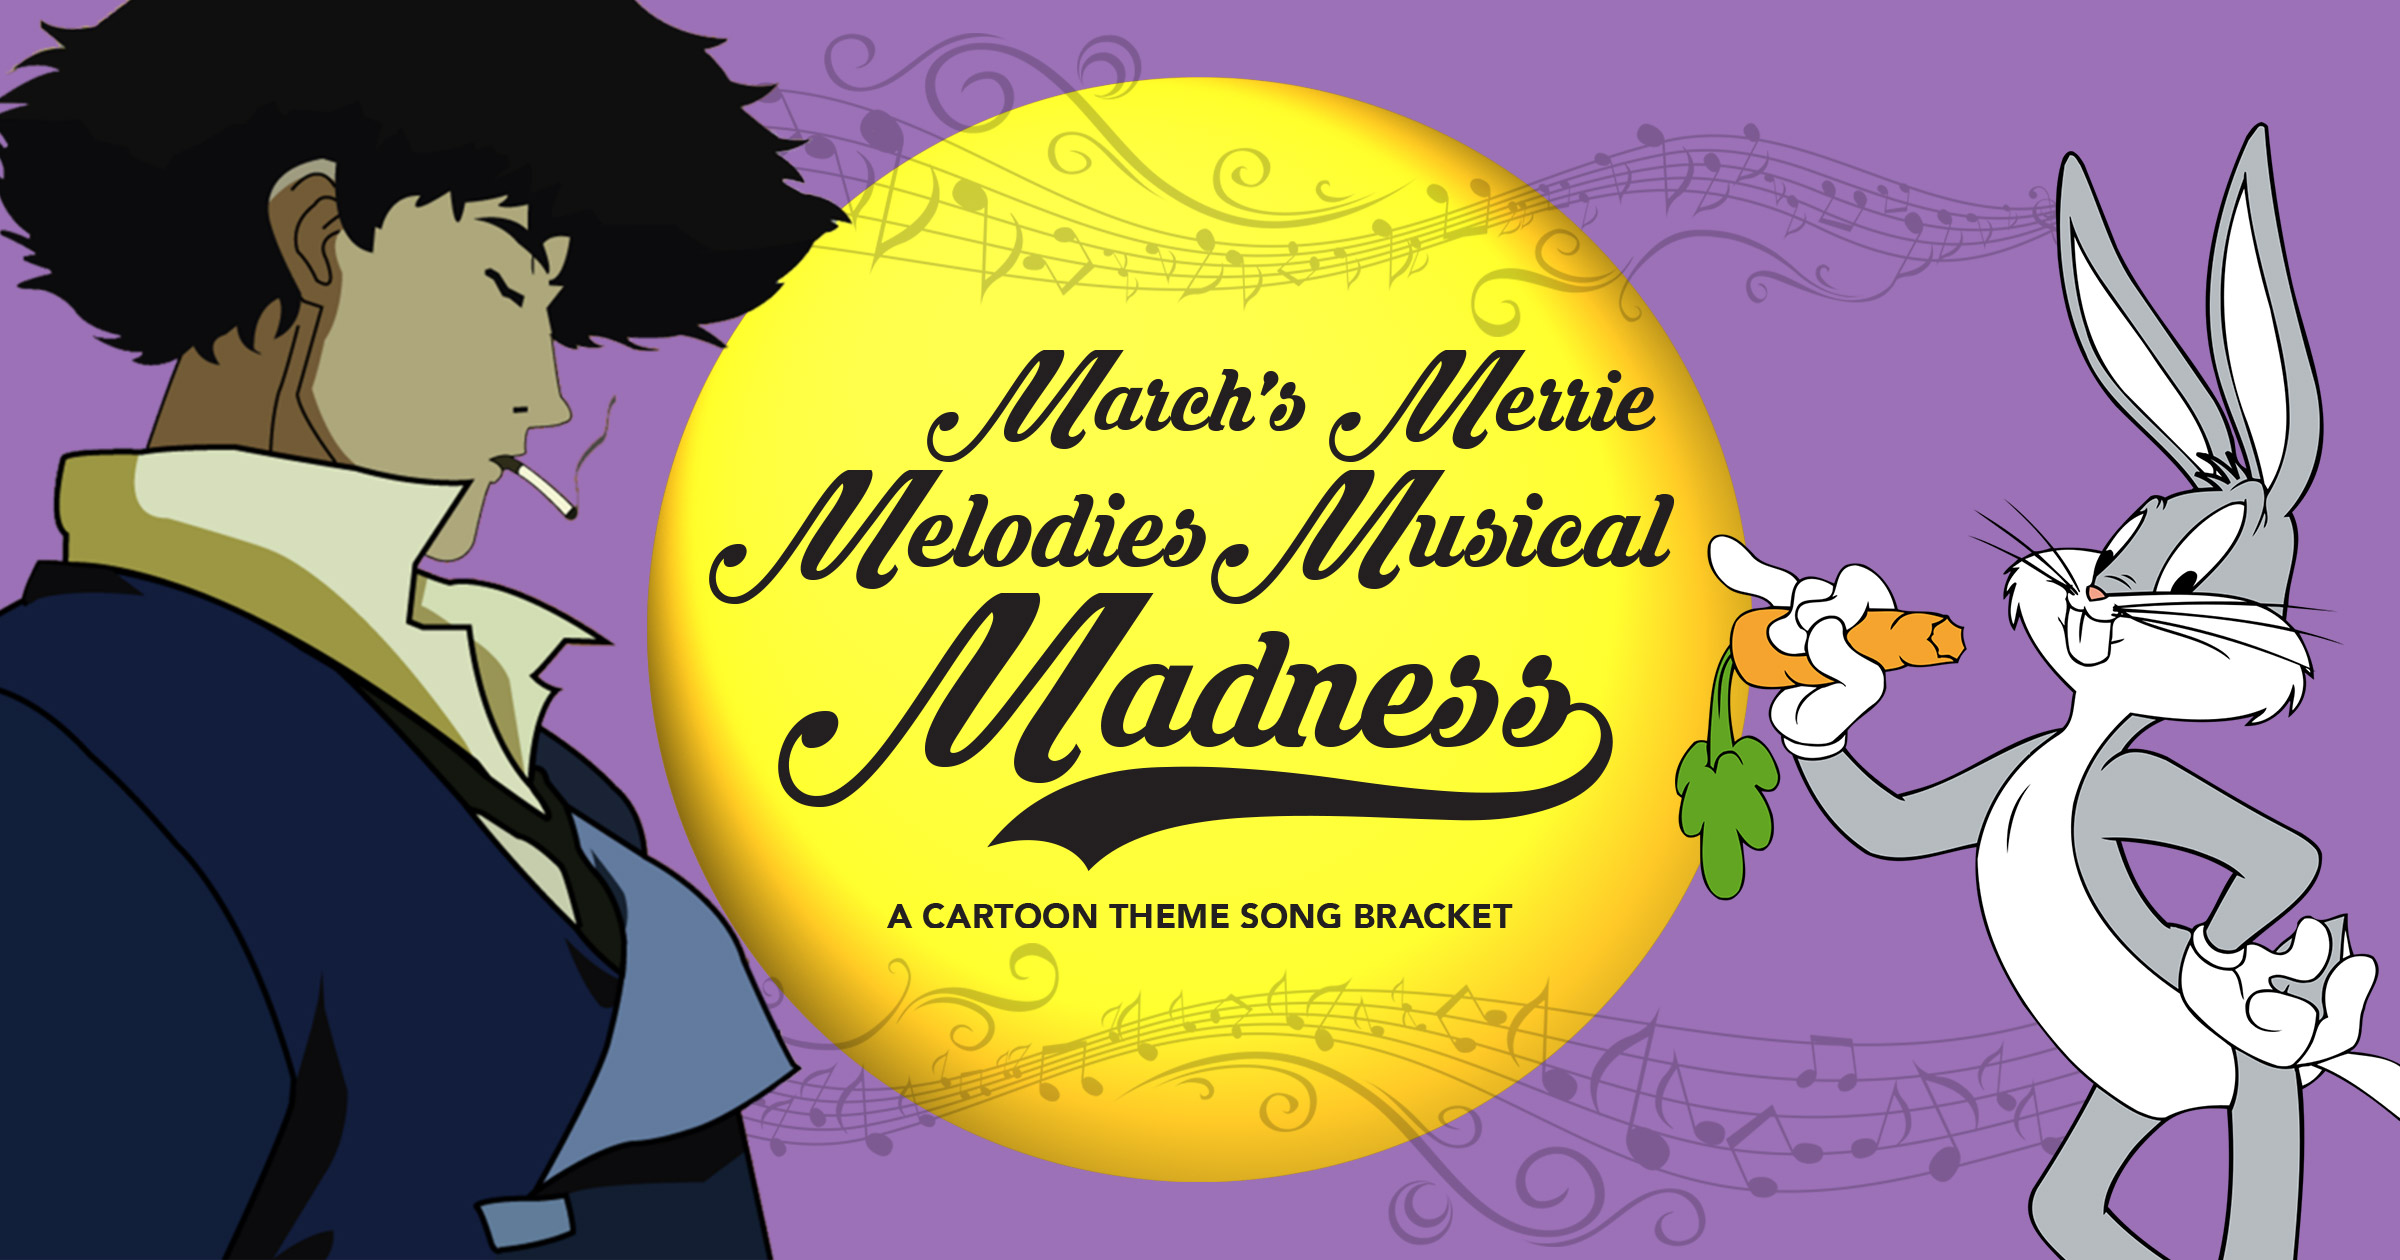 The Best Cartoon Theme Songs: A March Madness Tournament – The Dot and Line